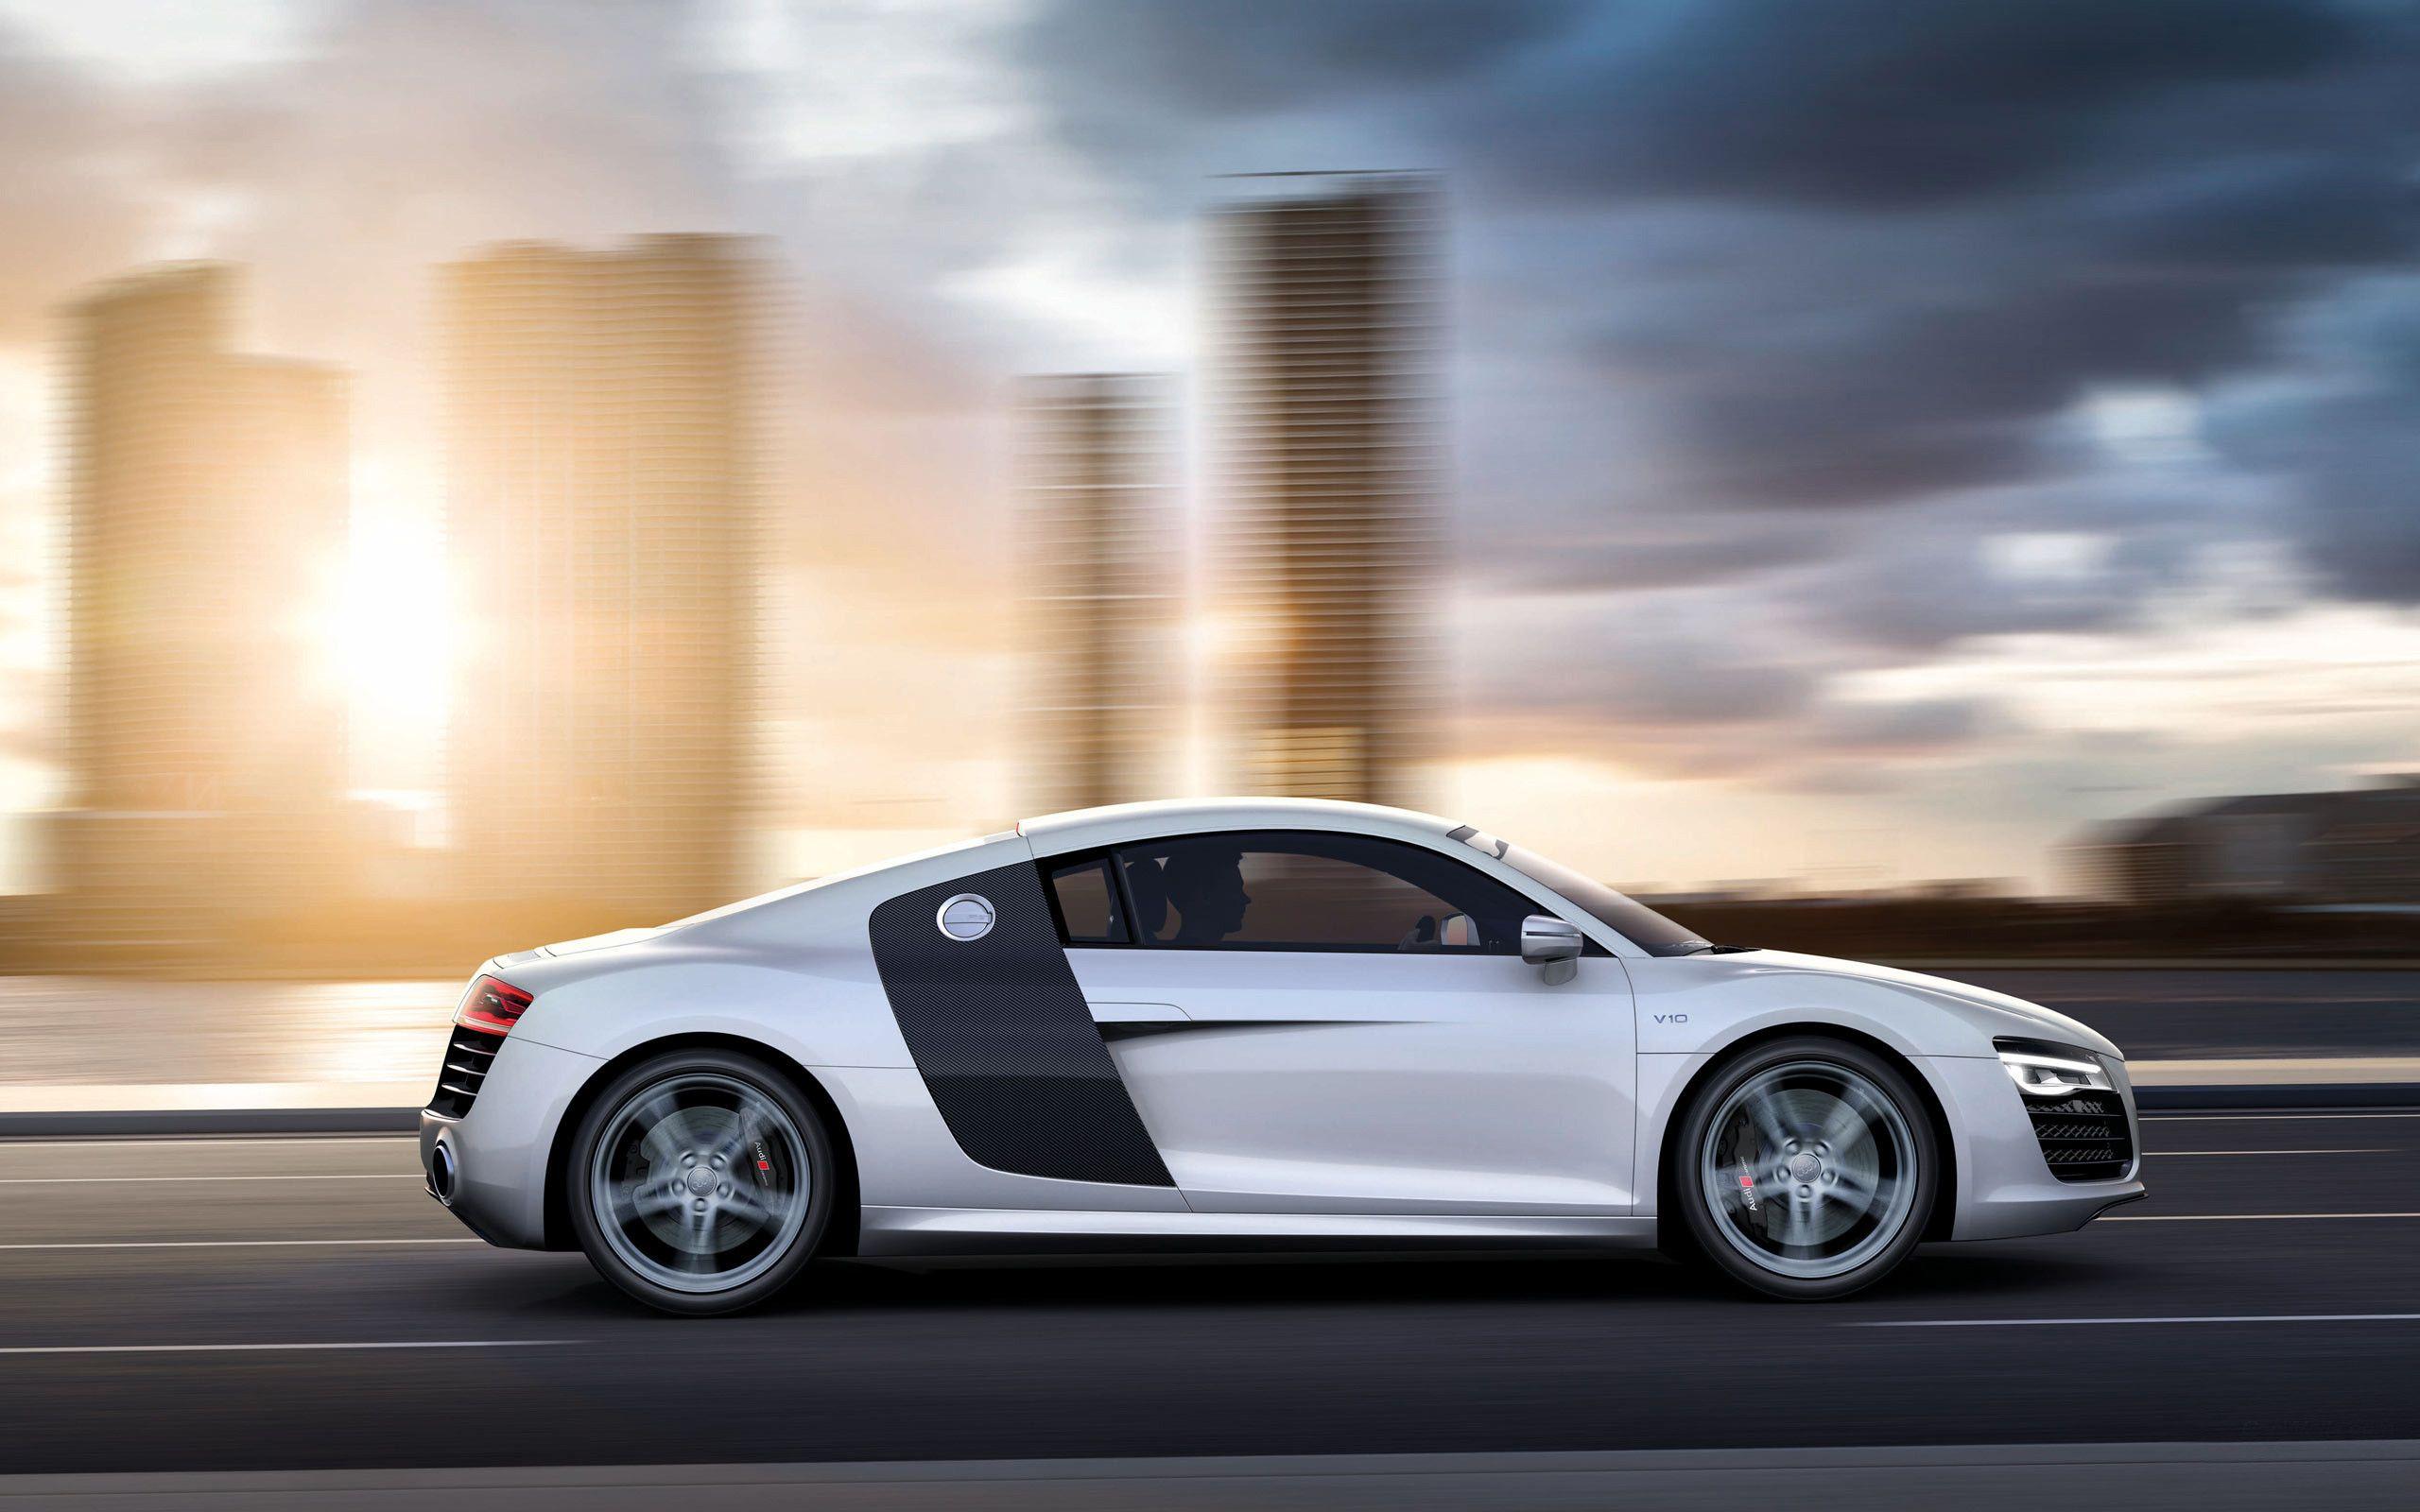 White Car Audi R8 Test Drive Wallpapers Full HD Wallpapers